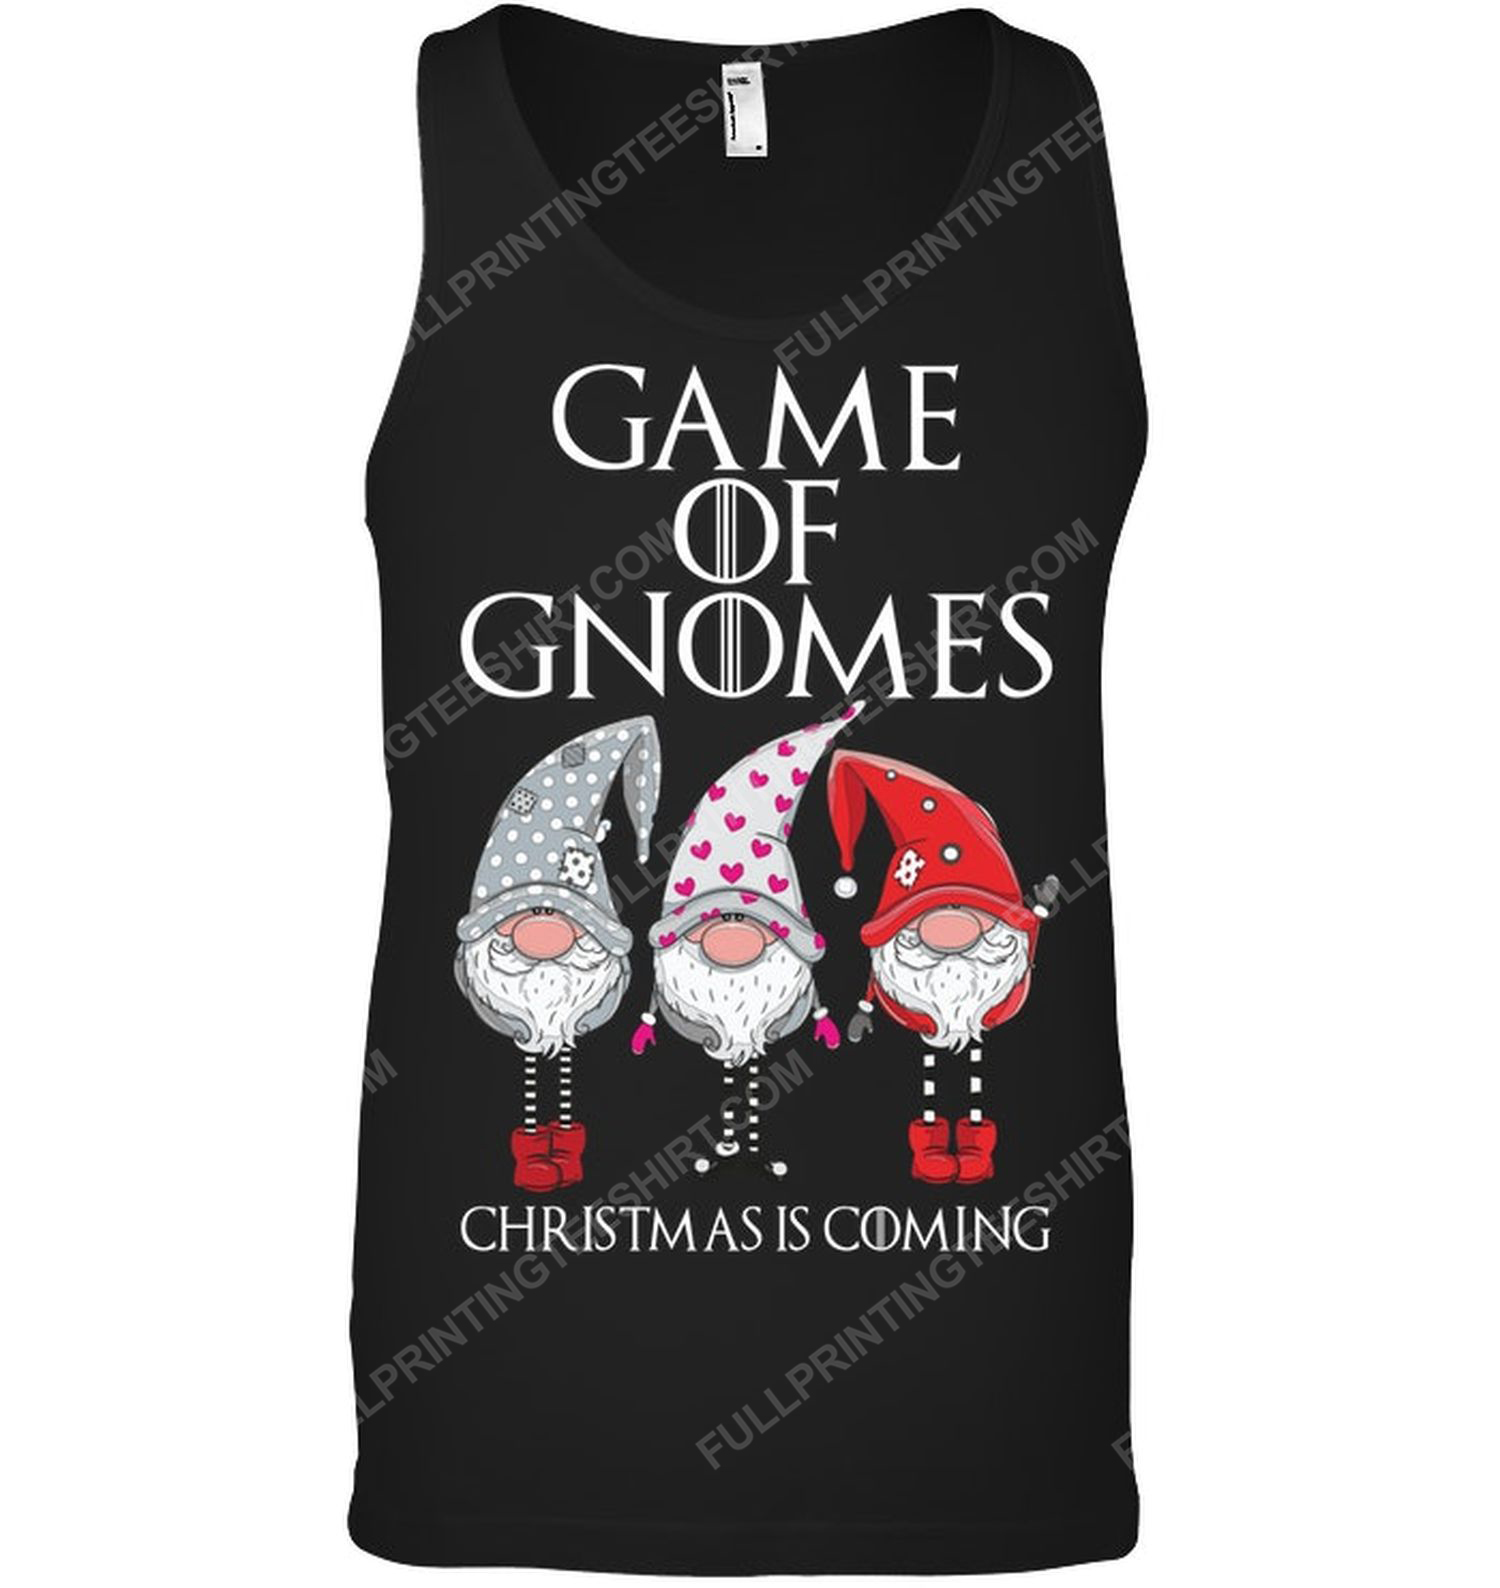 Game of gnomes christmas is coming tank top